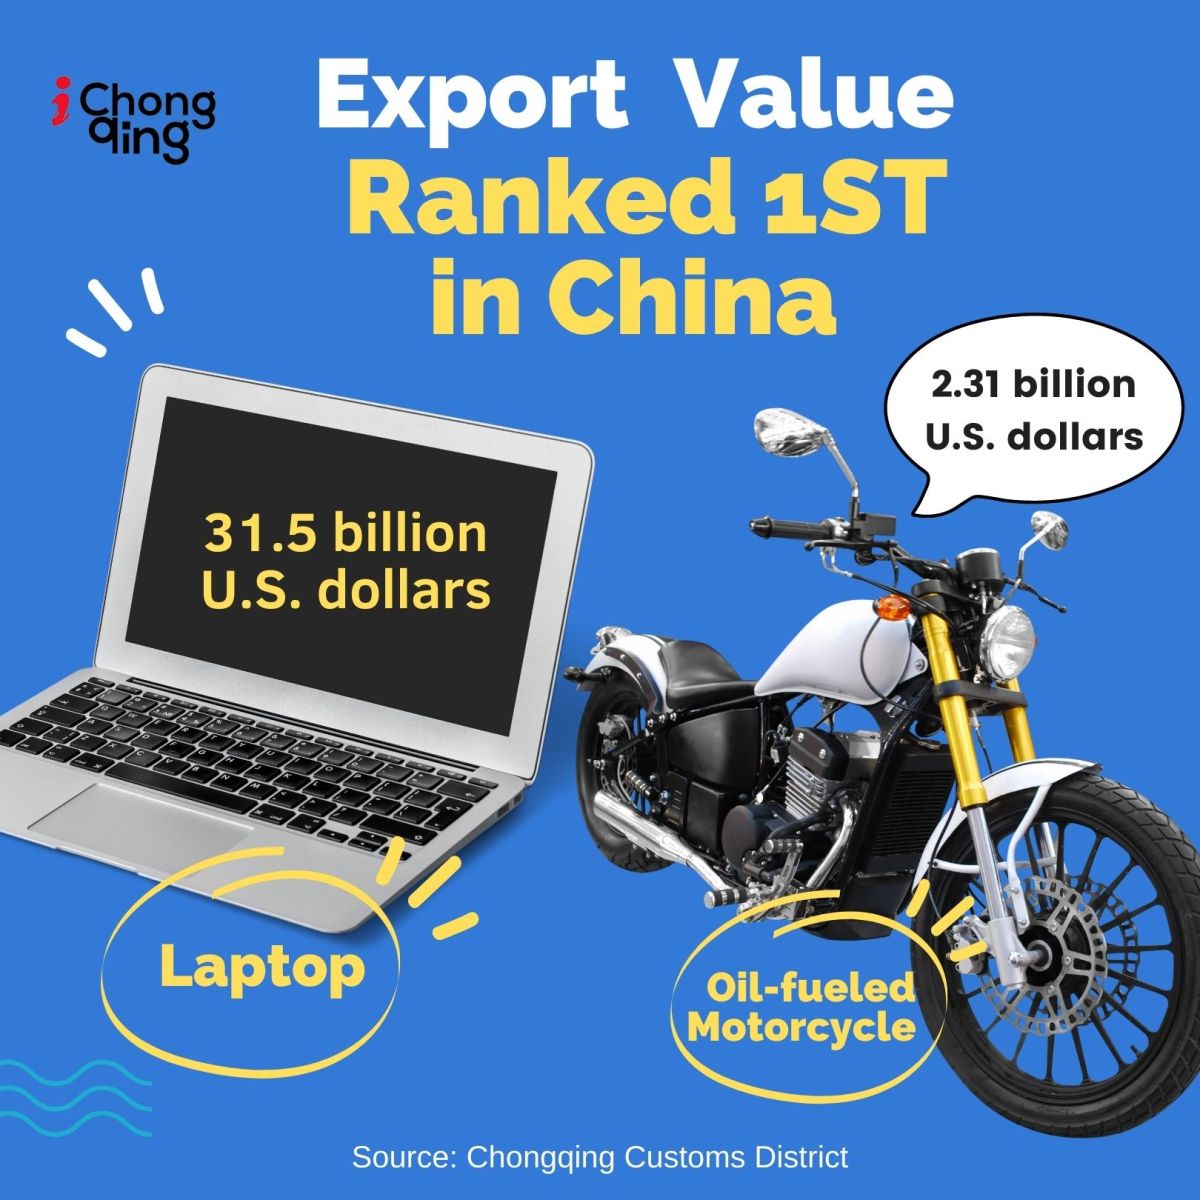 laptops and oil-fueled motorcycles ranked 1st domestically in the export value